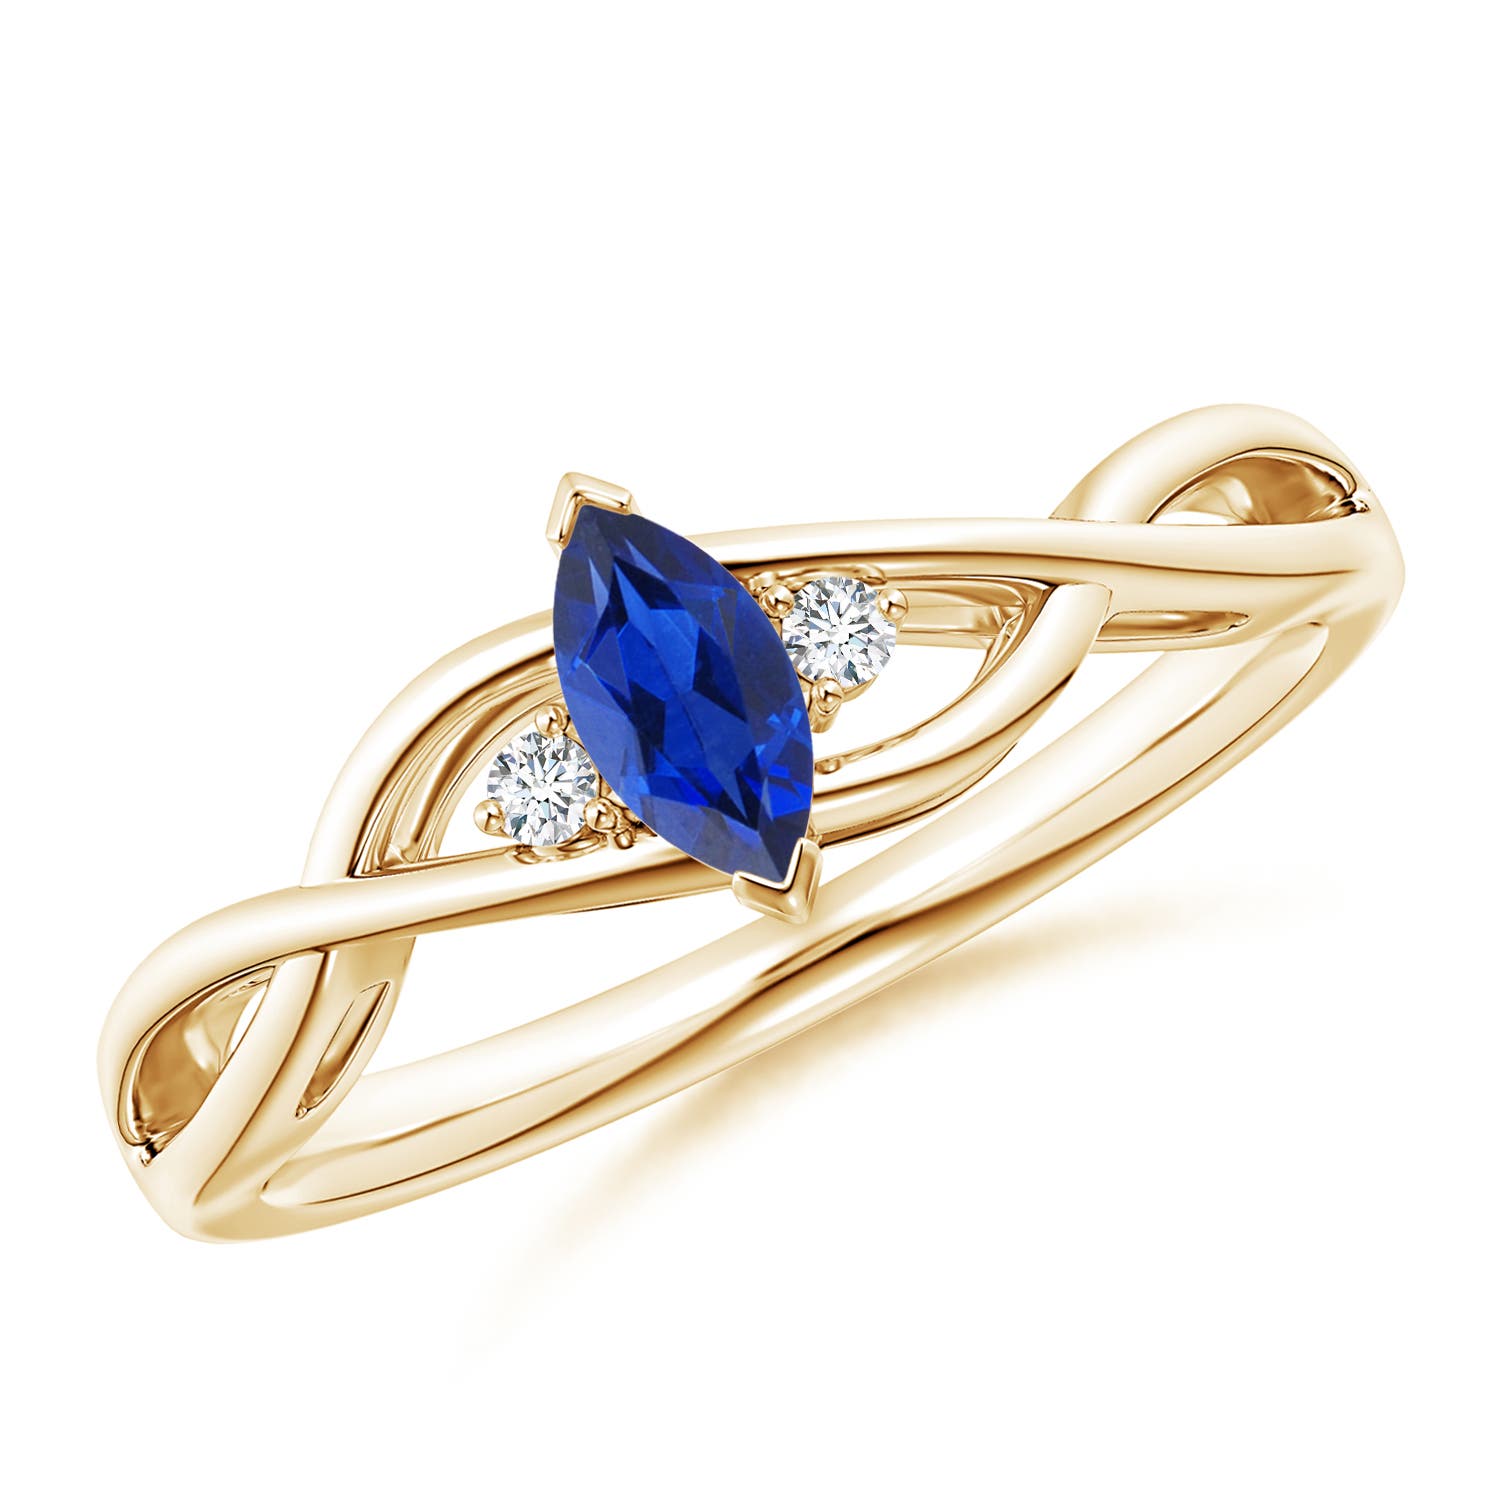 AAA - Blue Sapphire / 0.33 CT / 14 KT Yellow Gold